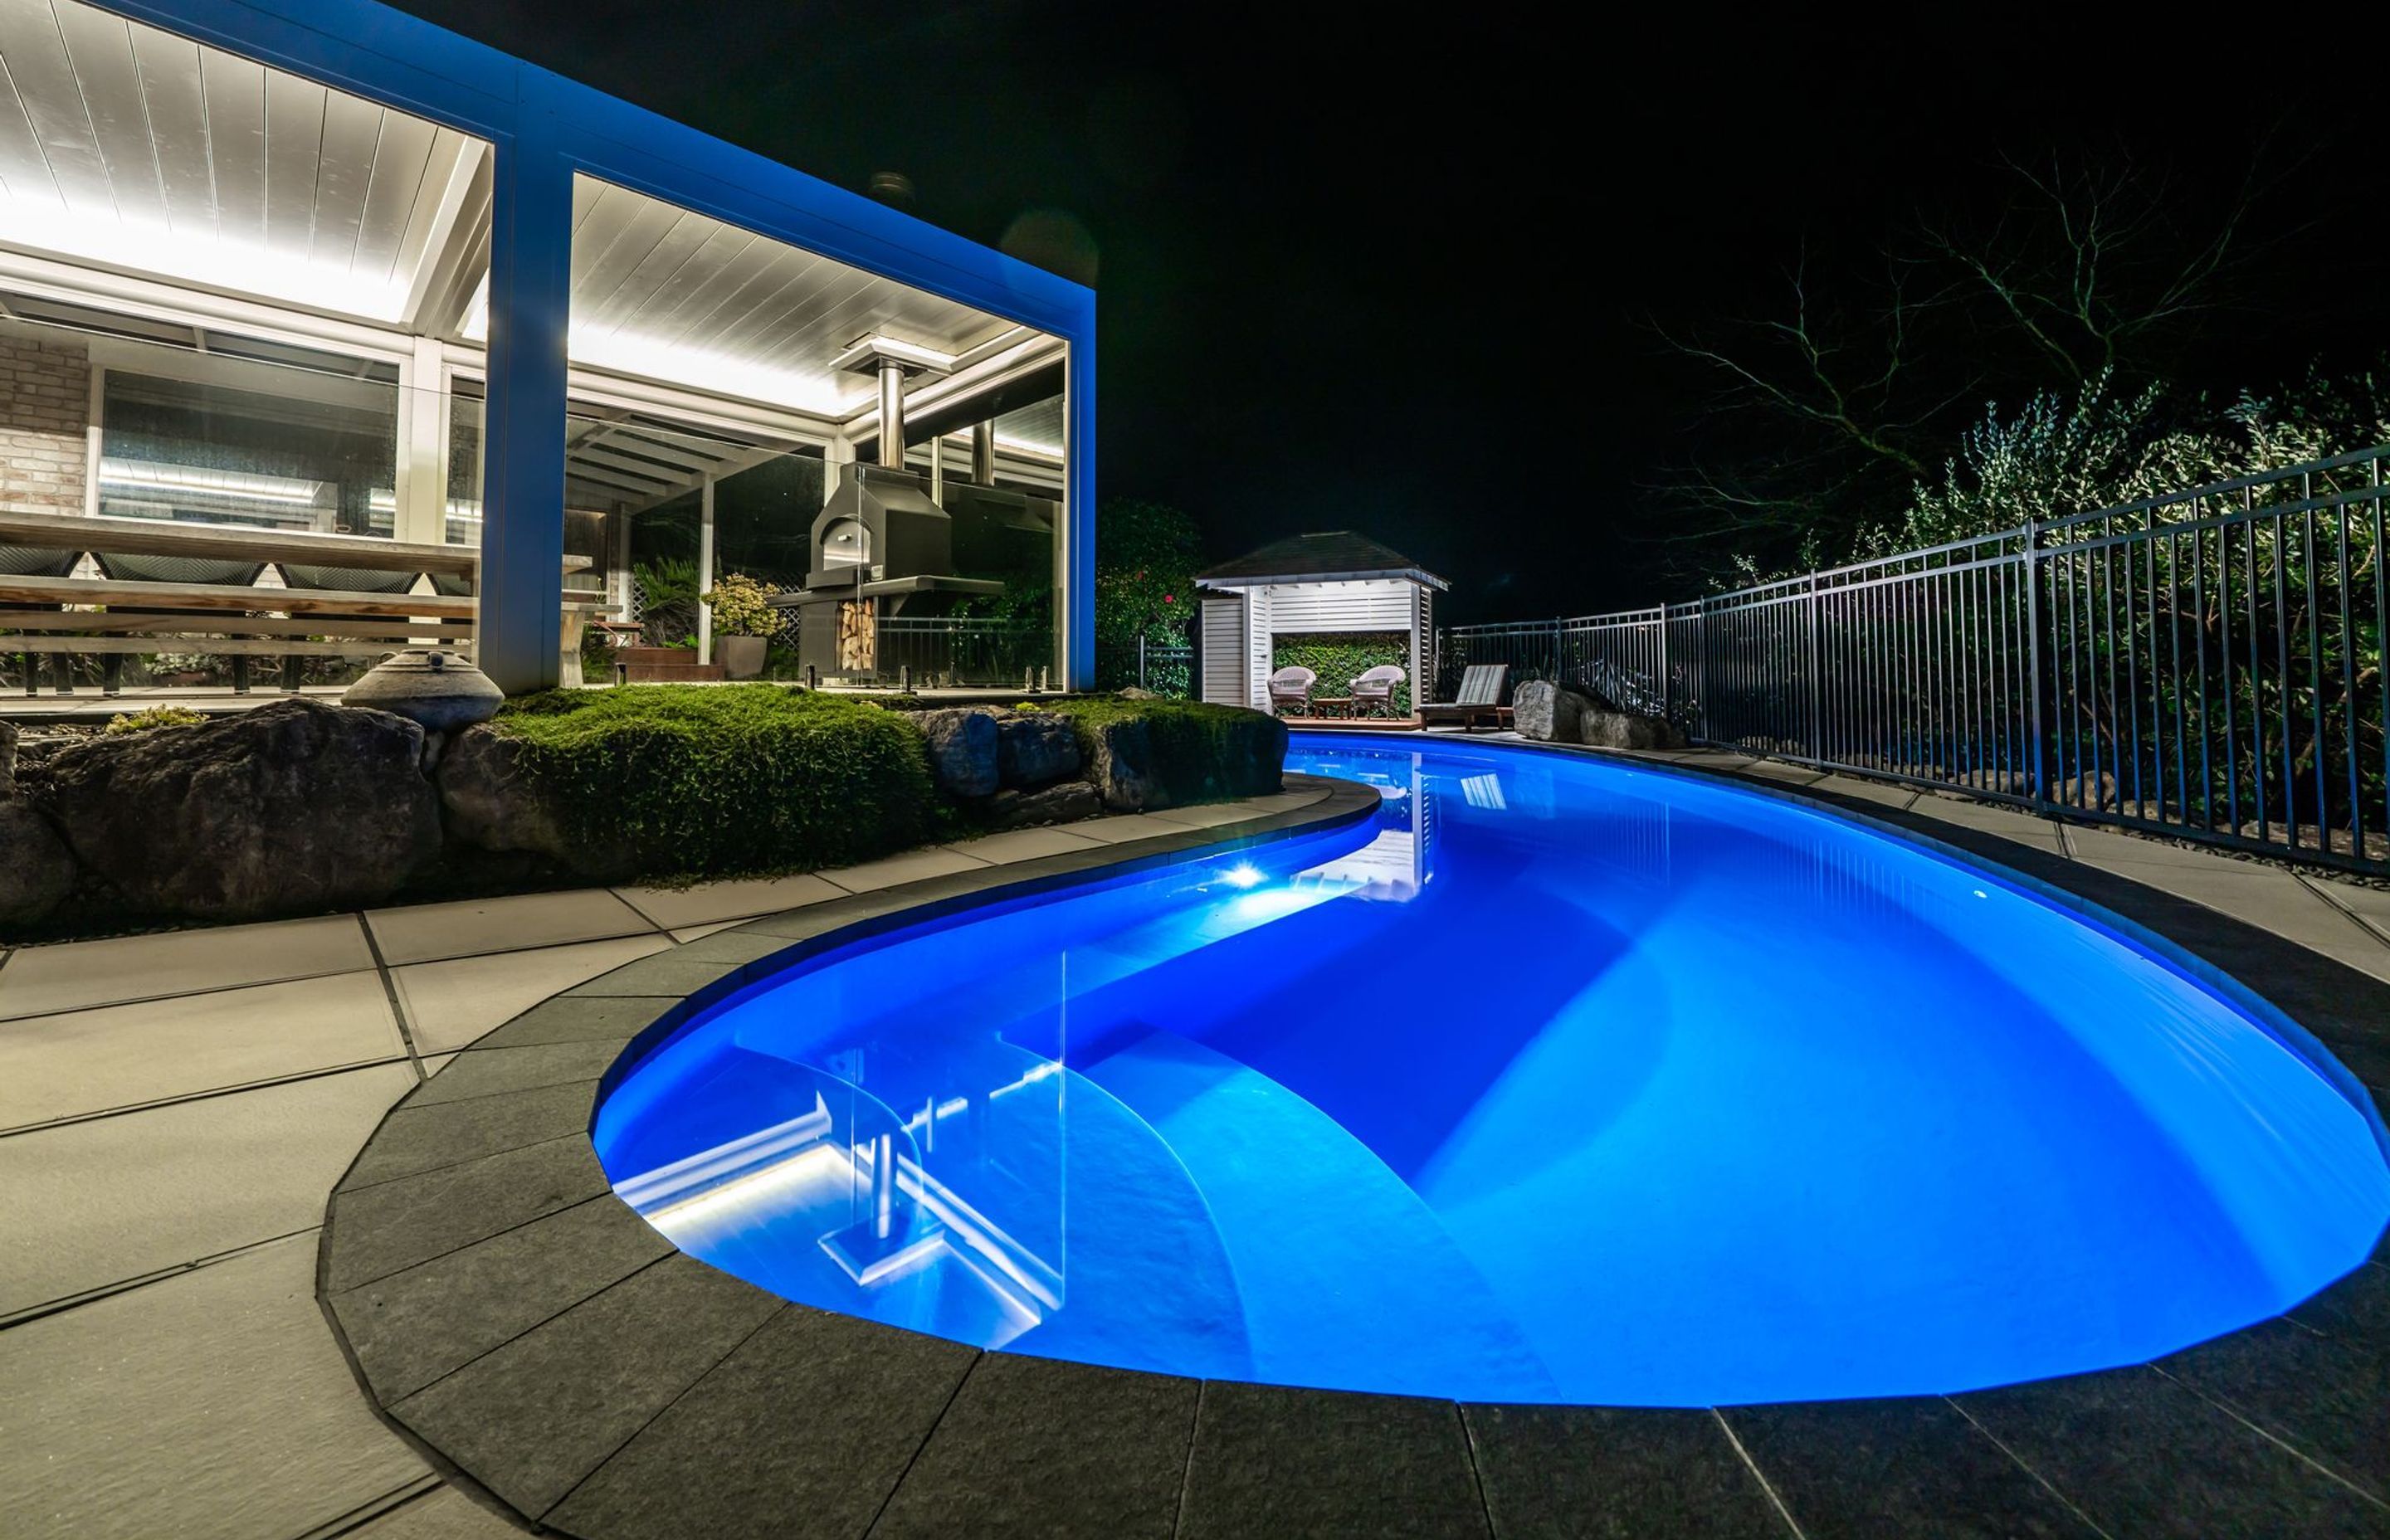 A resort-style oasis: A Tauranga pool's journey to Pool of the Year